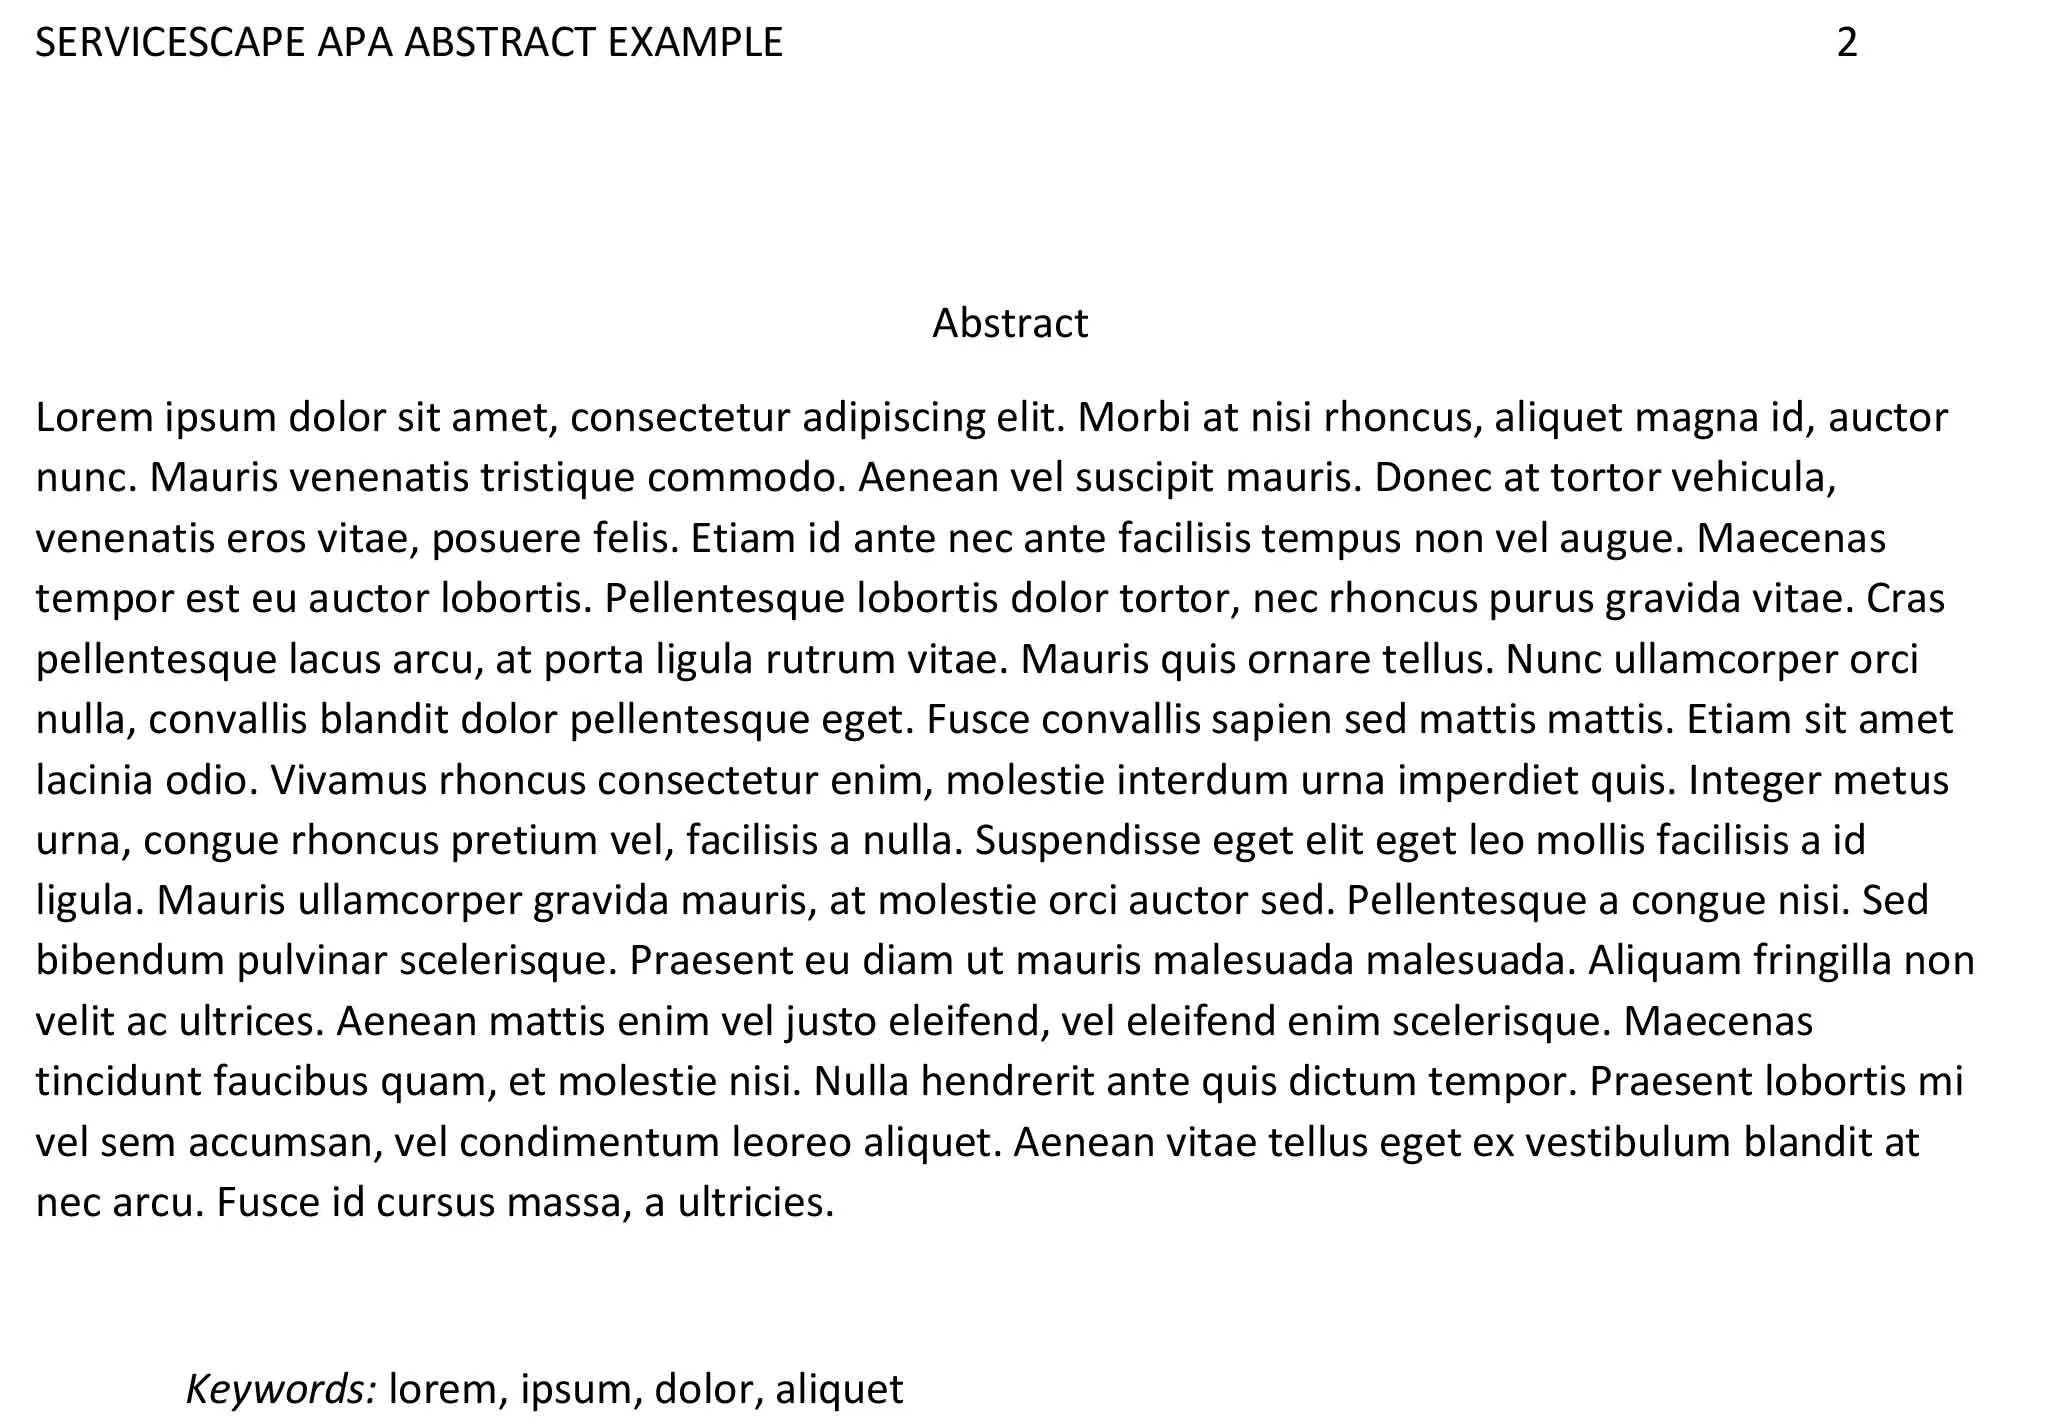 The Basic Format of an APA Abstract with Examples